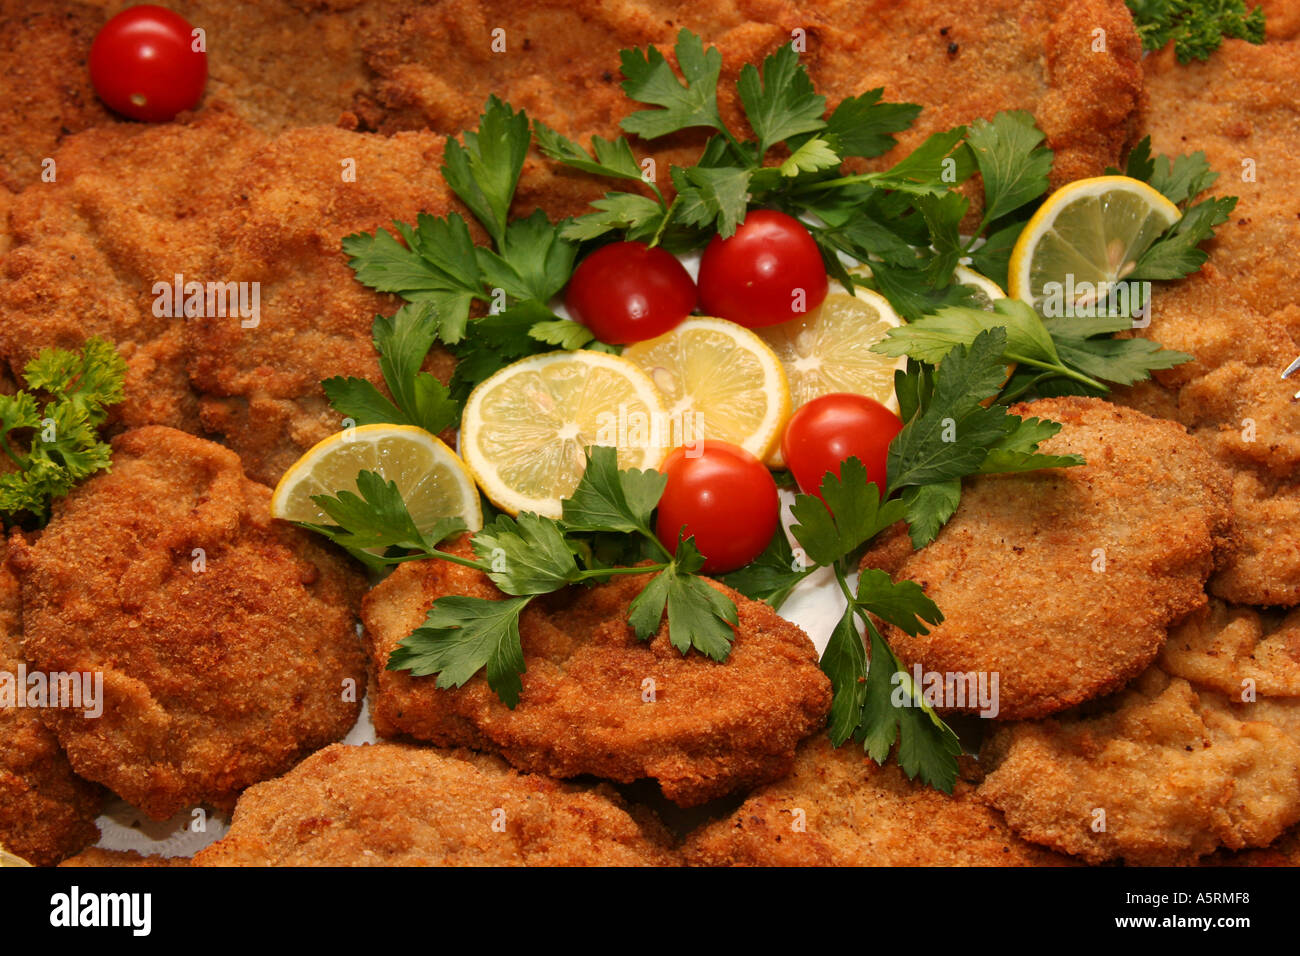 Wiener Schnitzel cutlet at a country stile buffet Stock Photo